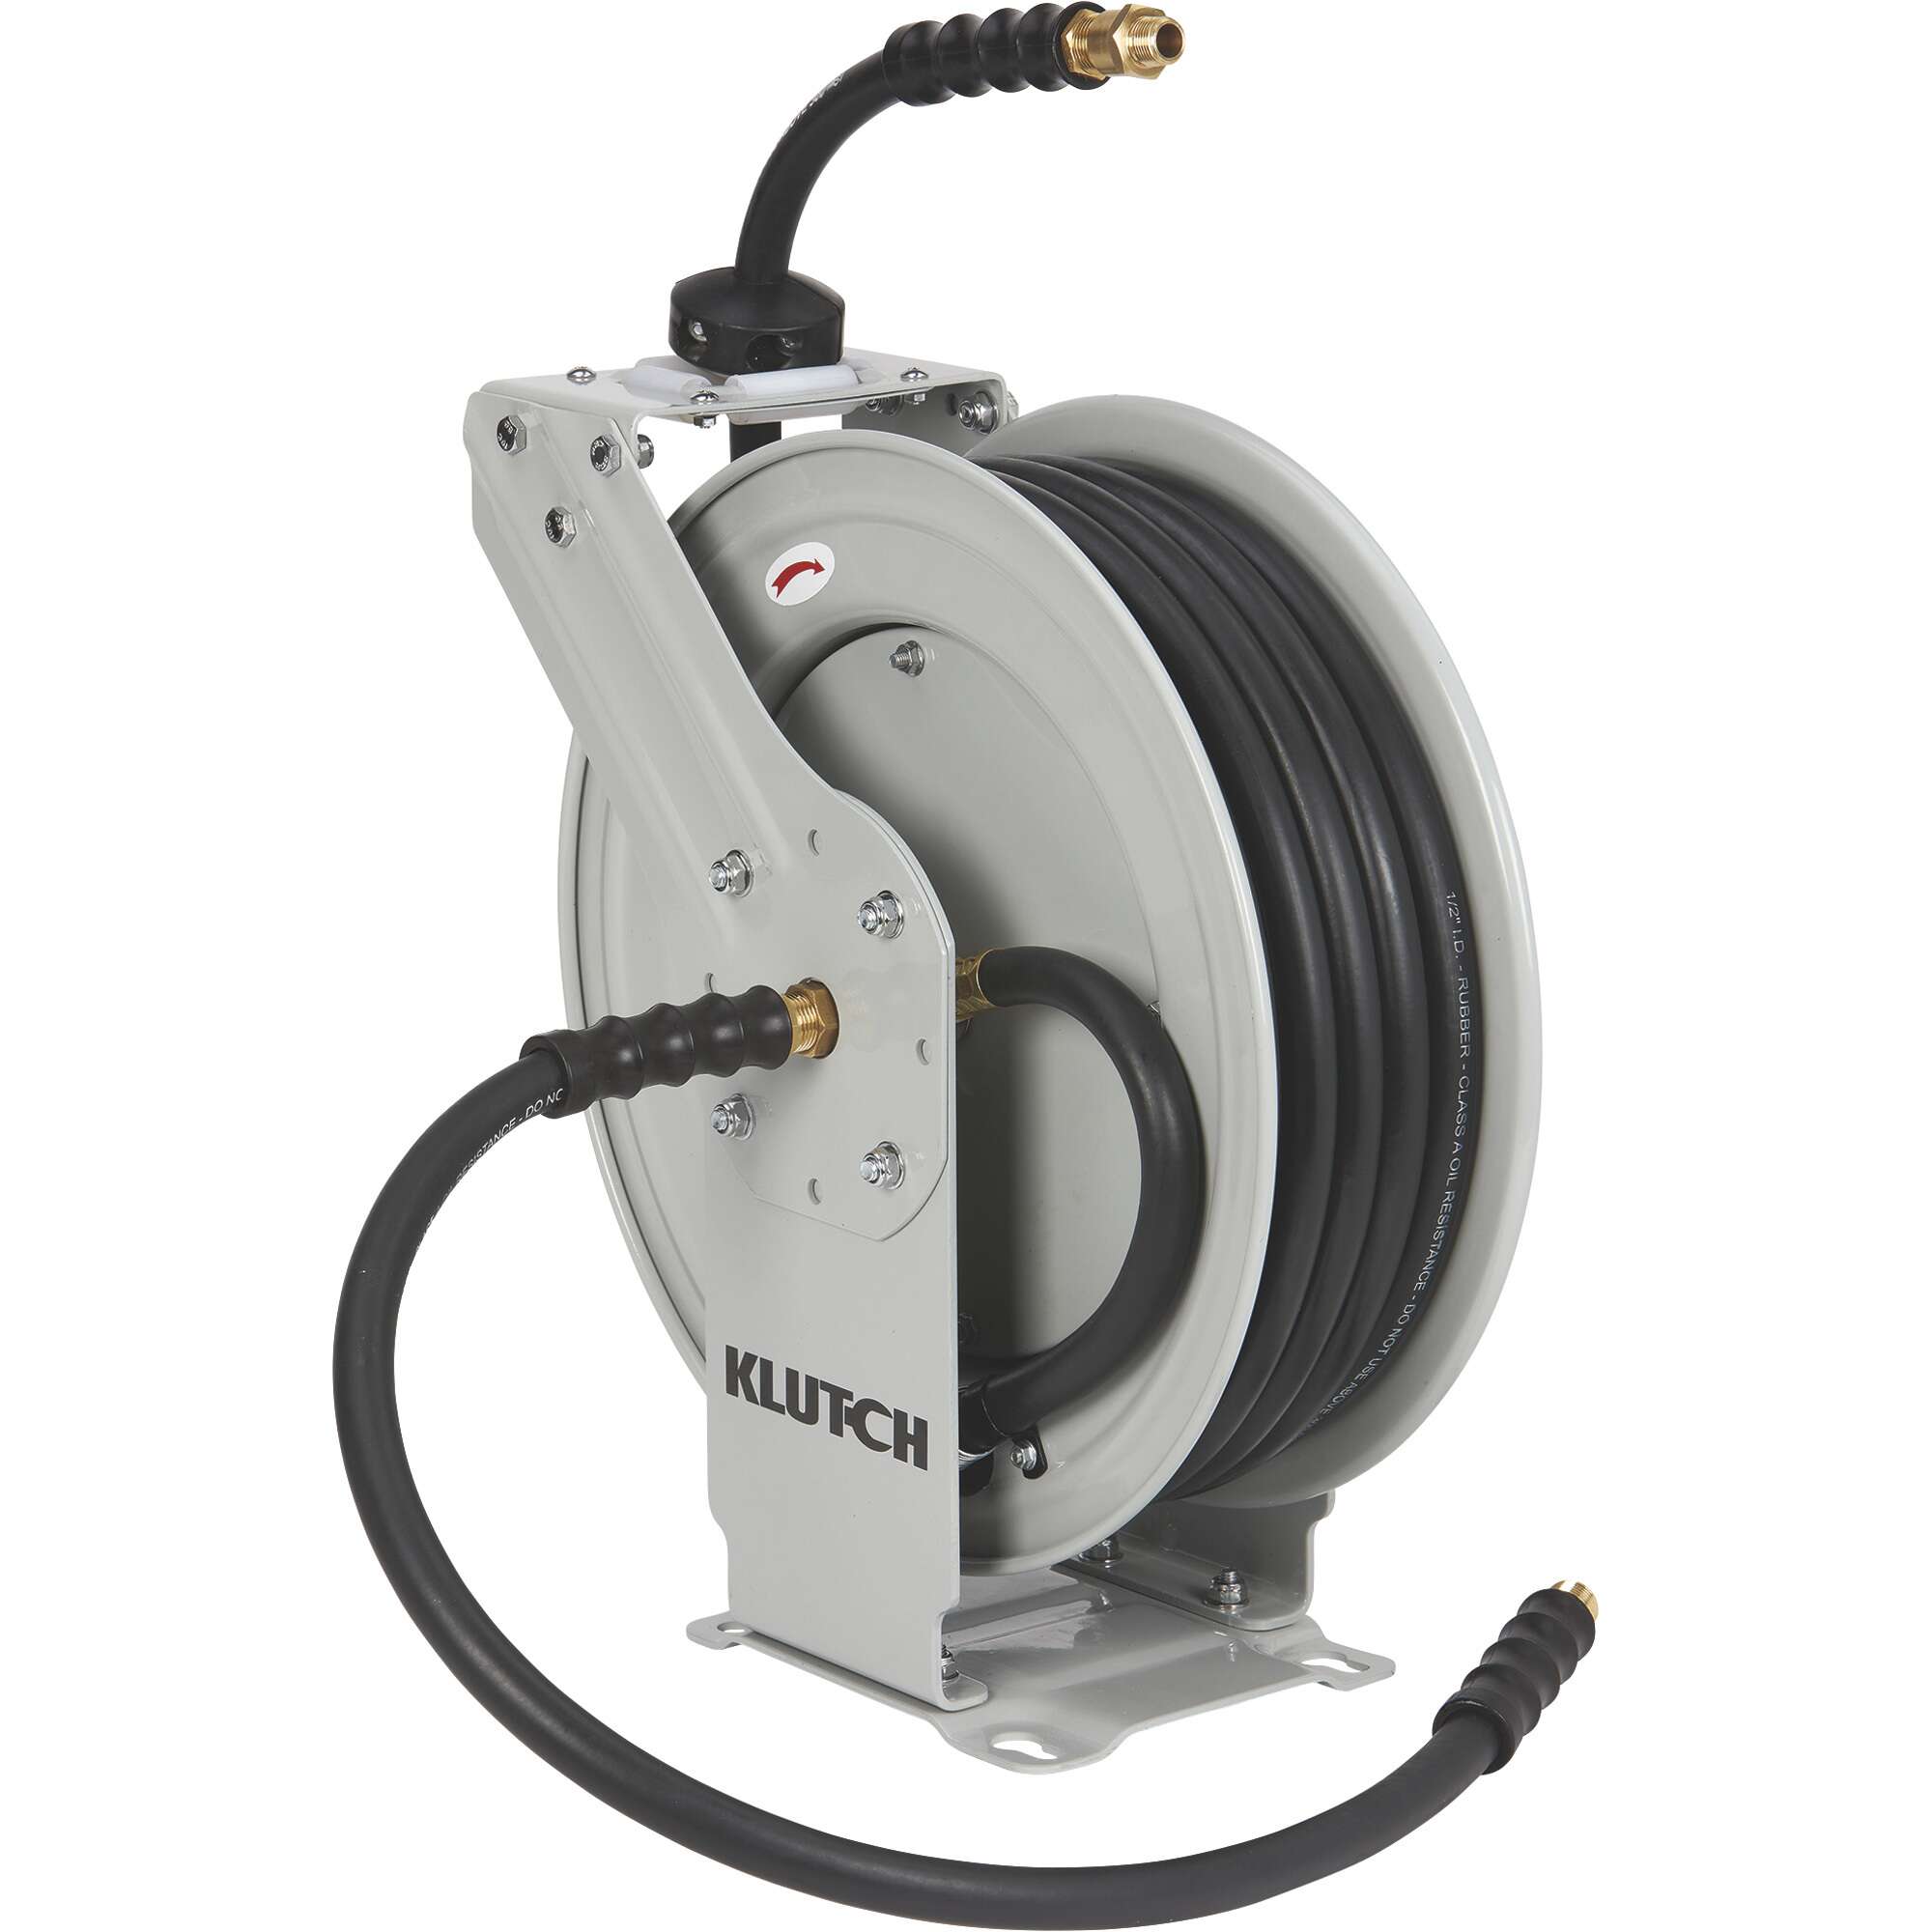 Klutch Auto Rewind Air Hose Reel With 3/8in x 50ft NBR Rubber Hose Dual Arm  300 Max PSI